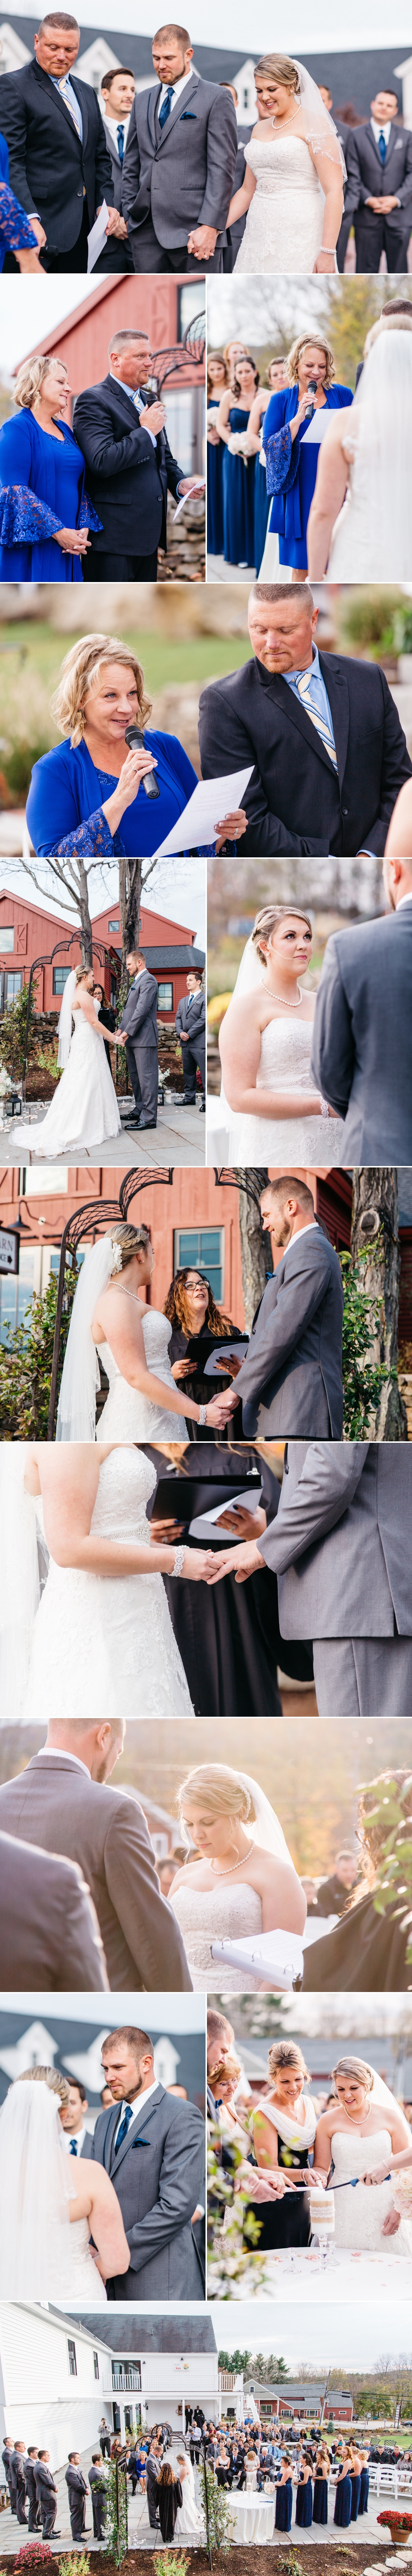 photo collage of ceremony at nichole and george's classic wedding at the wight barn in sturbridge massachusetts